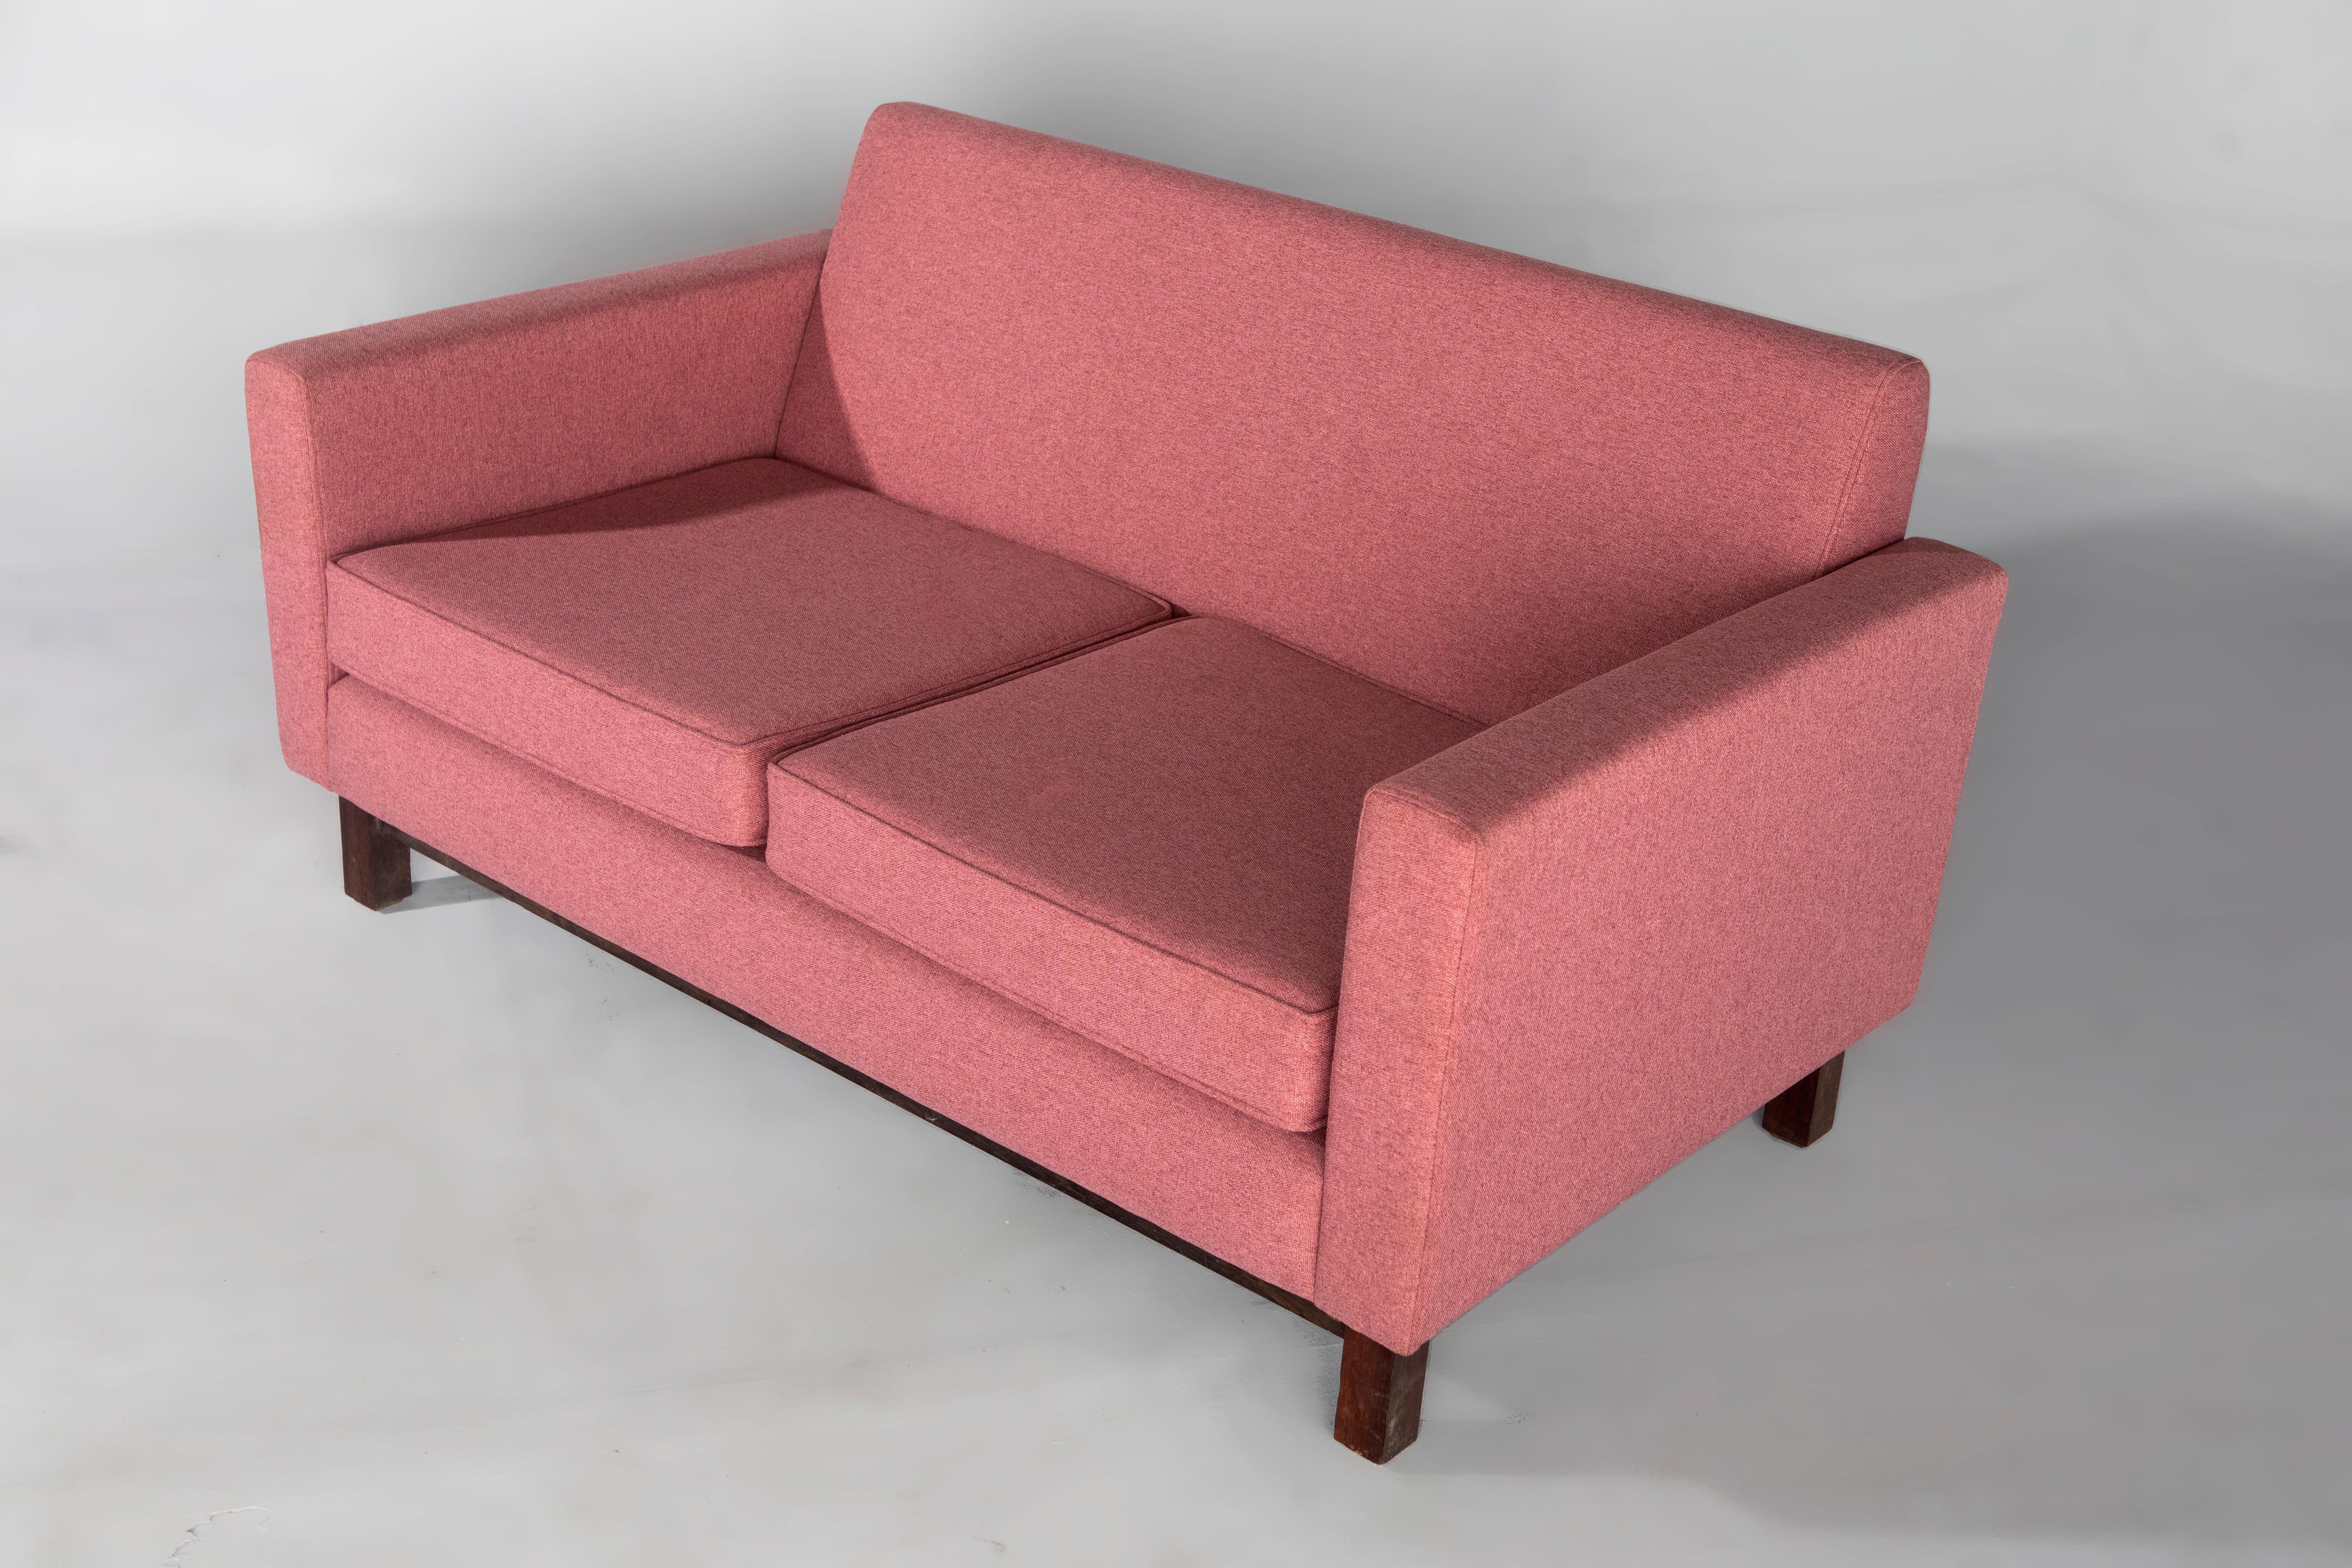 Woodwork Mid-Century Modern Sofa by Sergio Rodrigues, Brazil 1960s For Sale